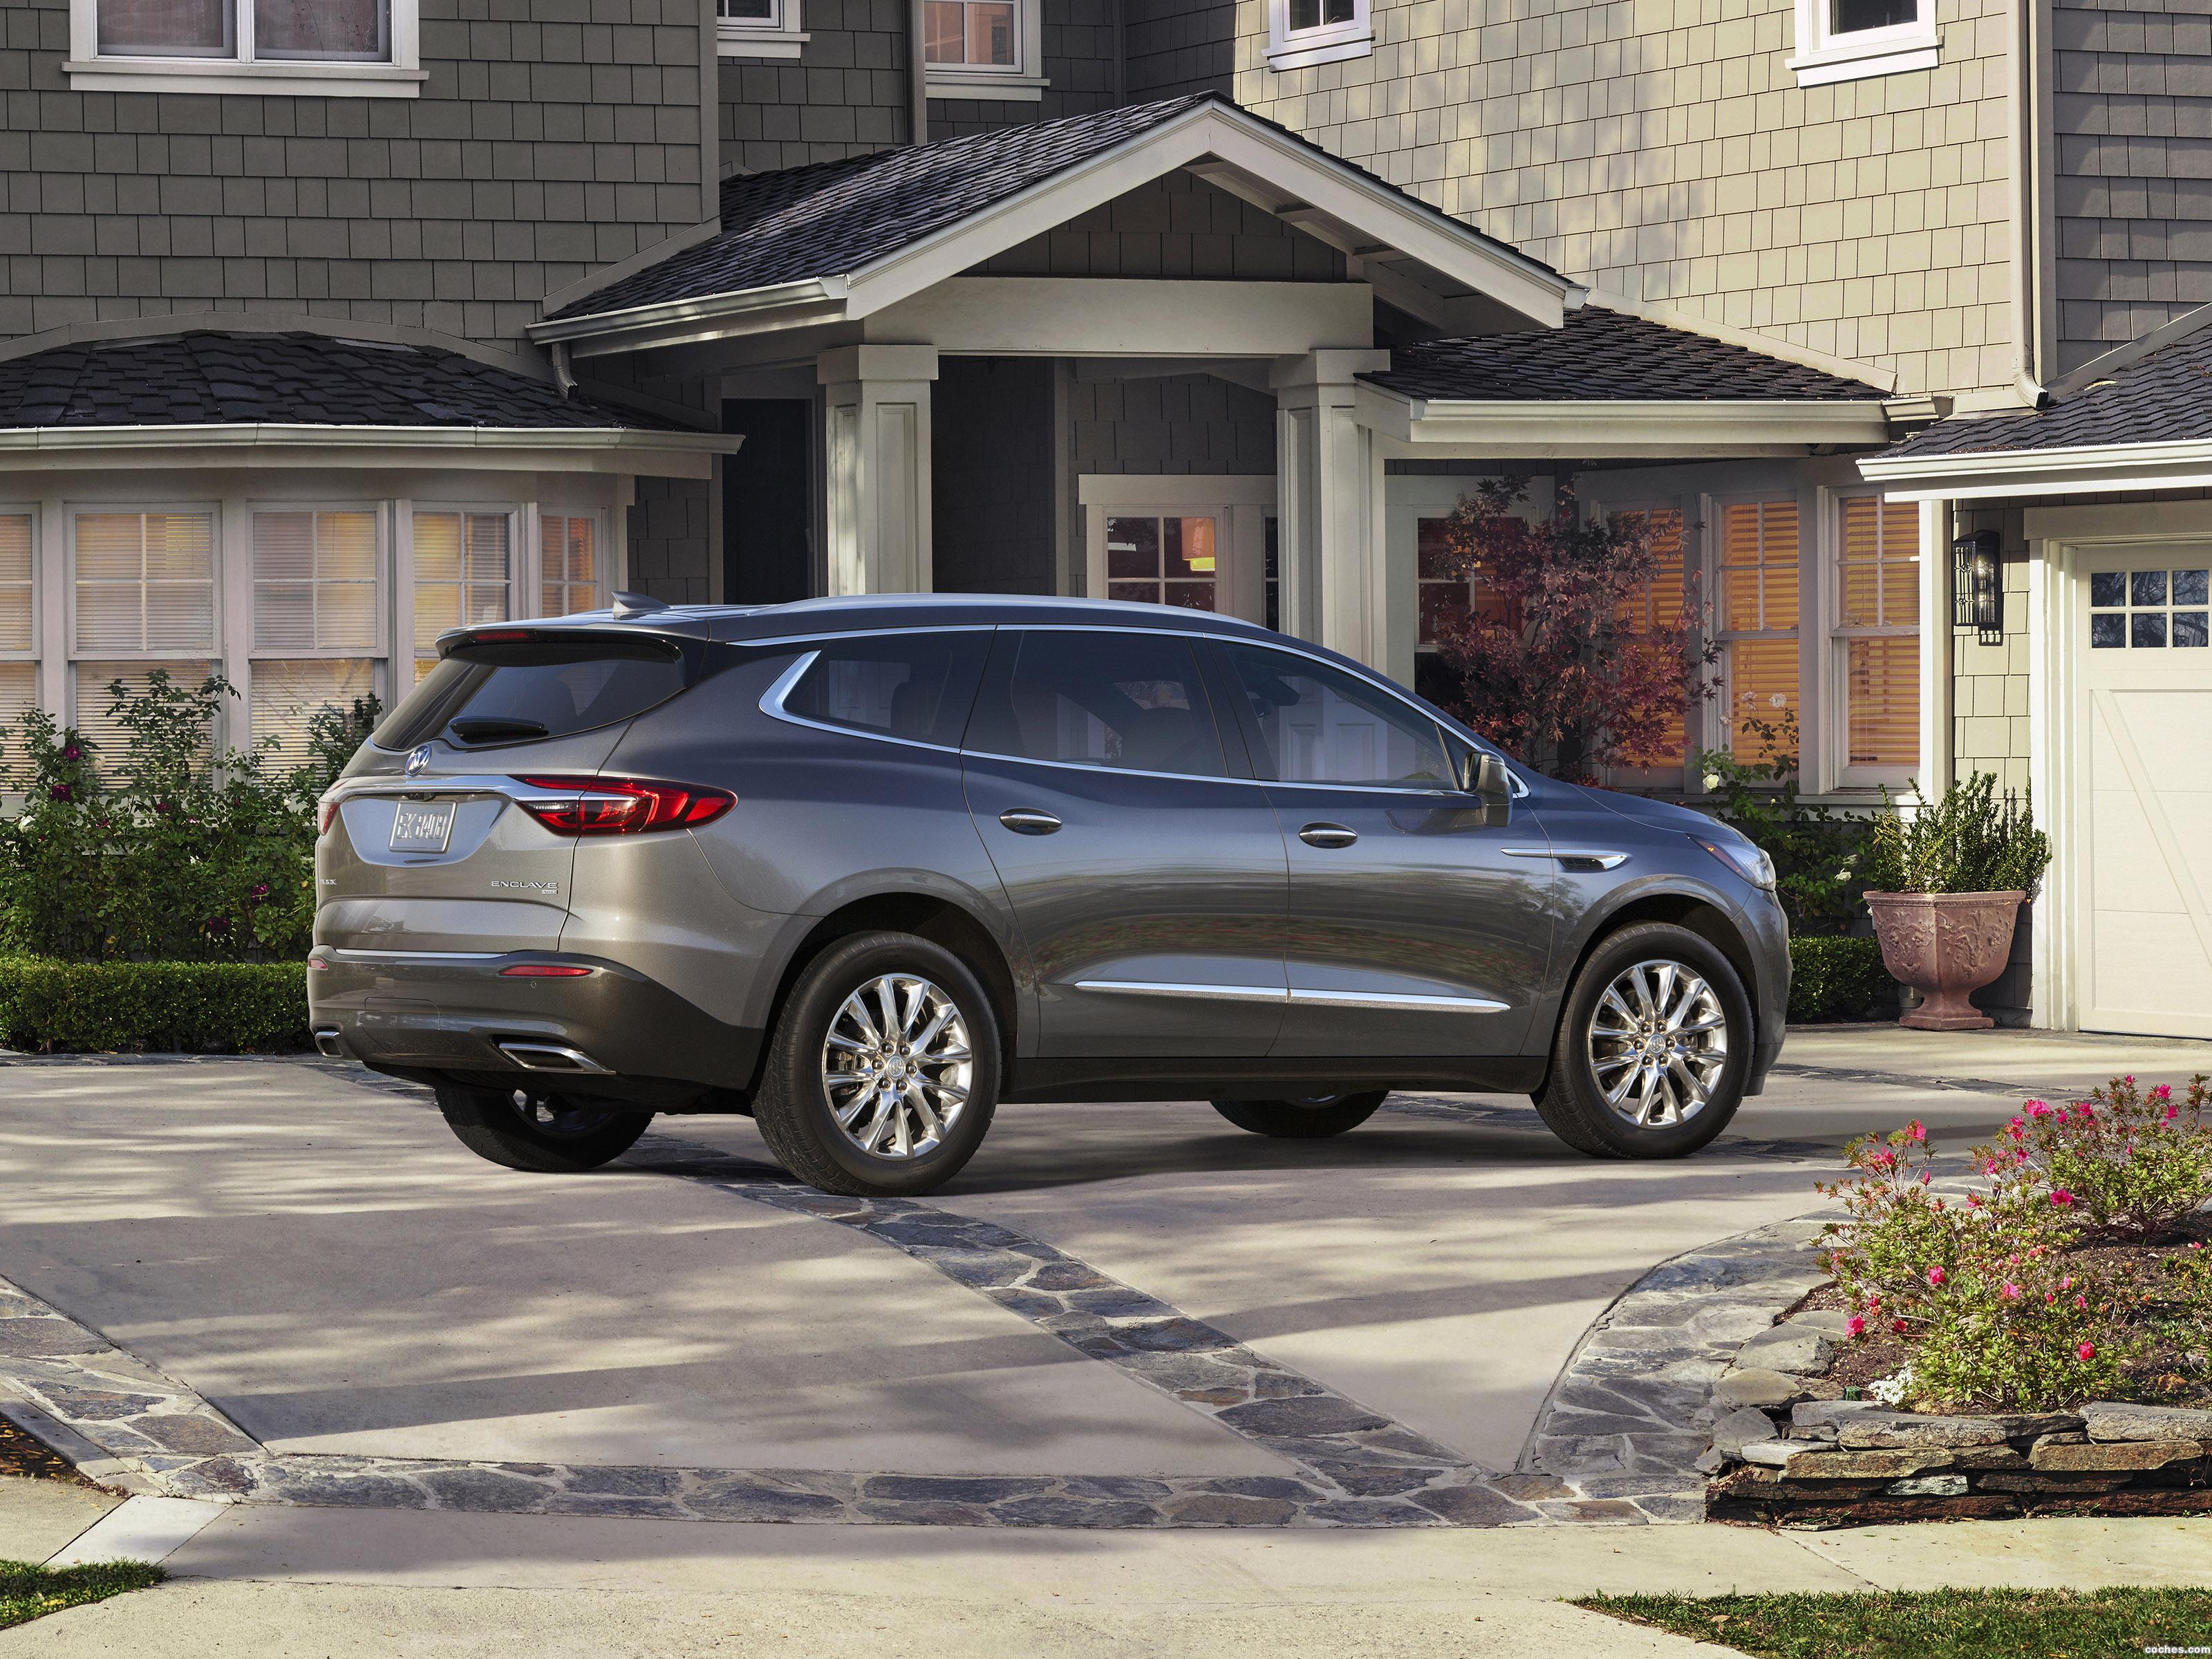 Buick Enclave exterior restyling